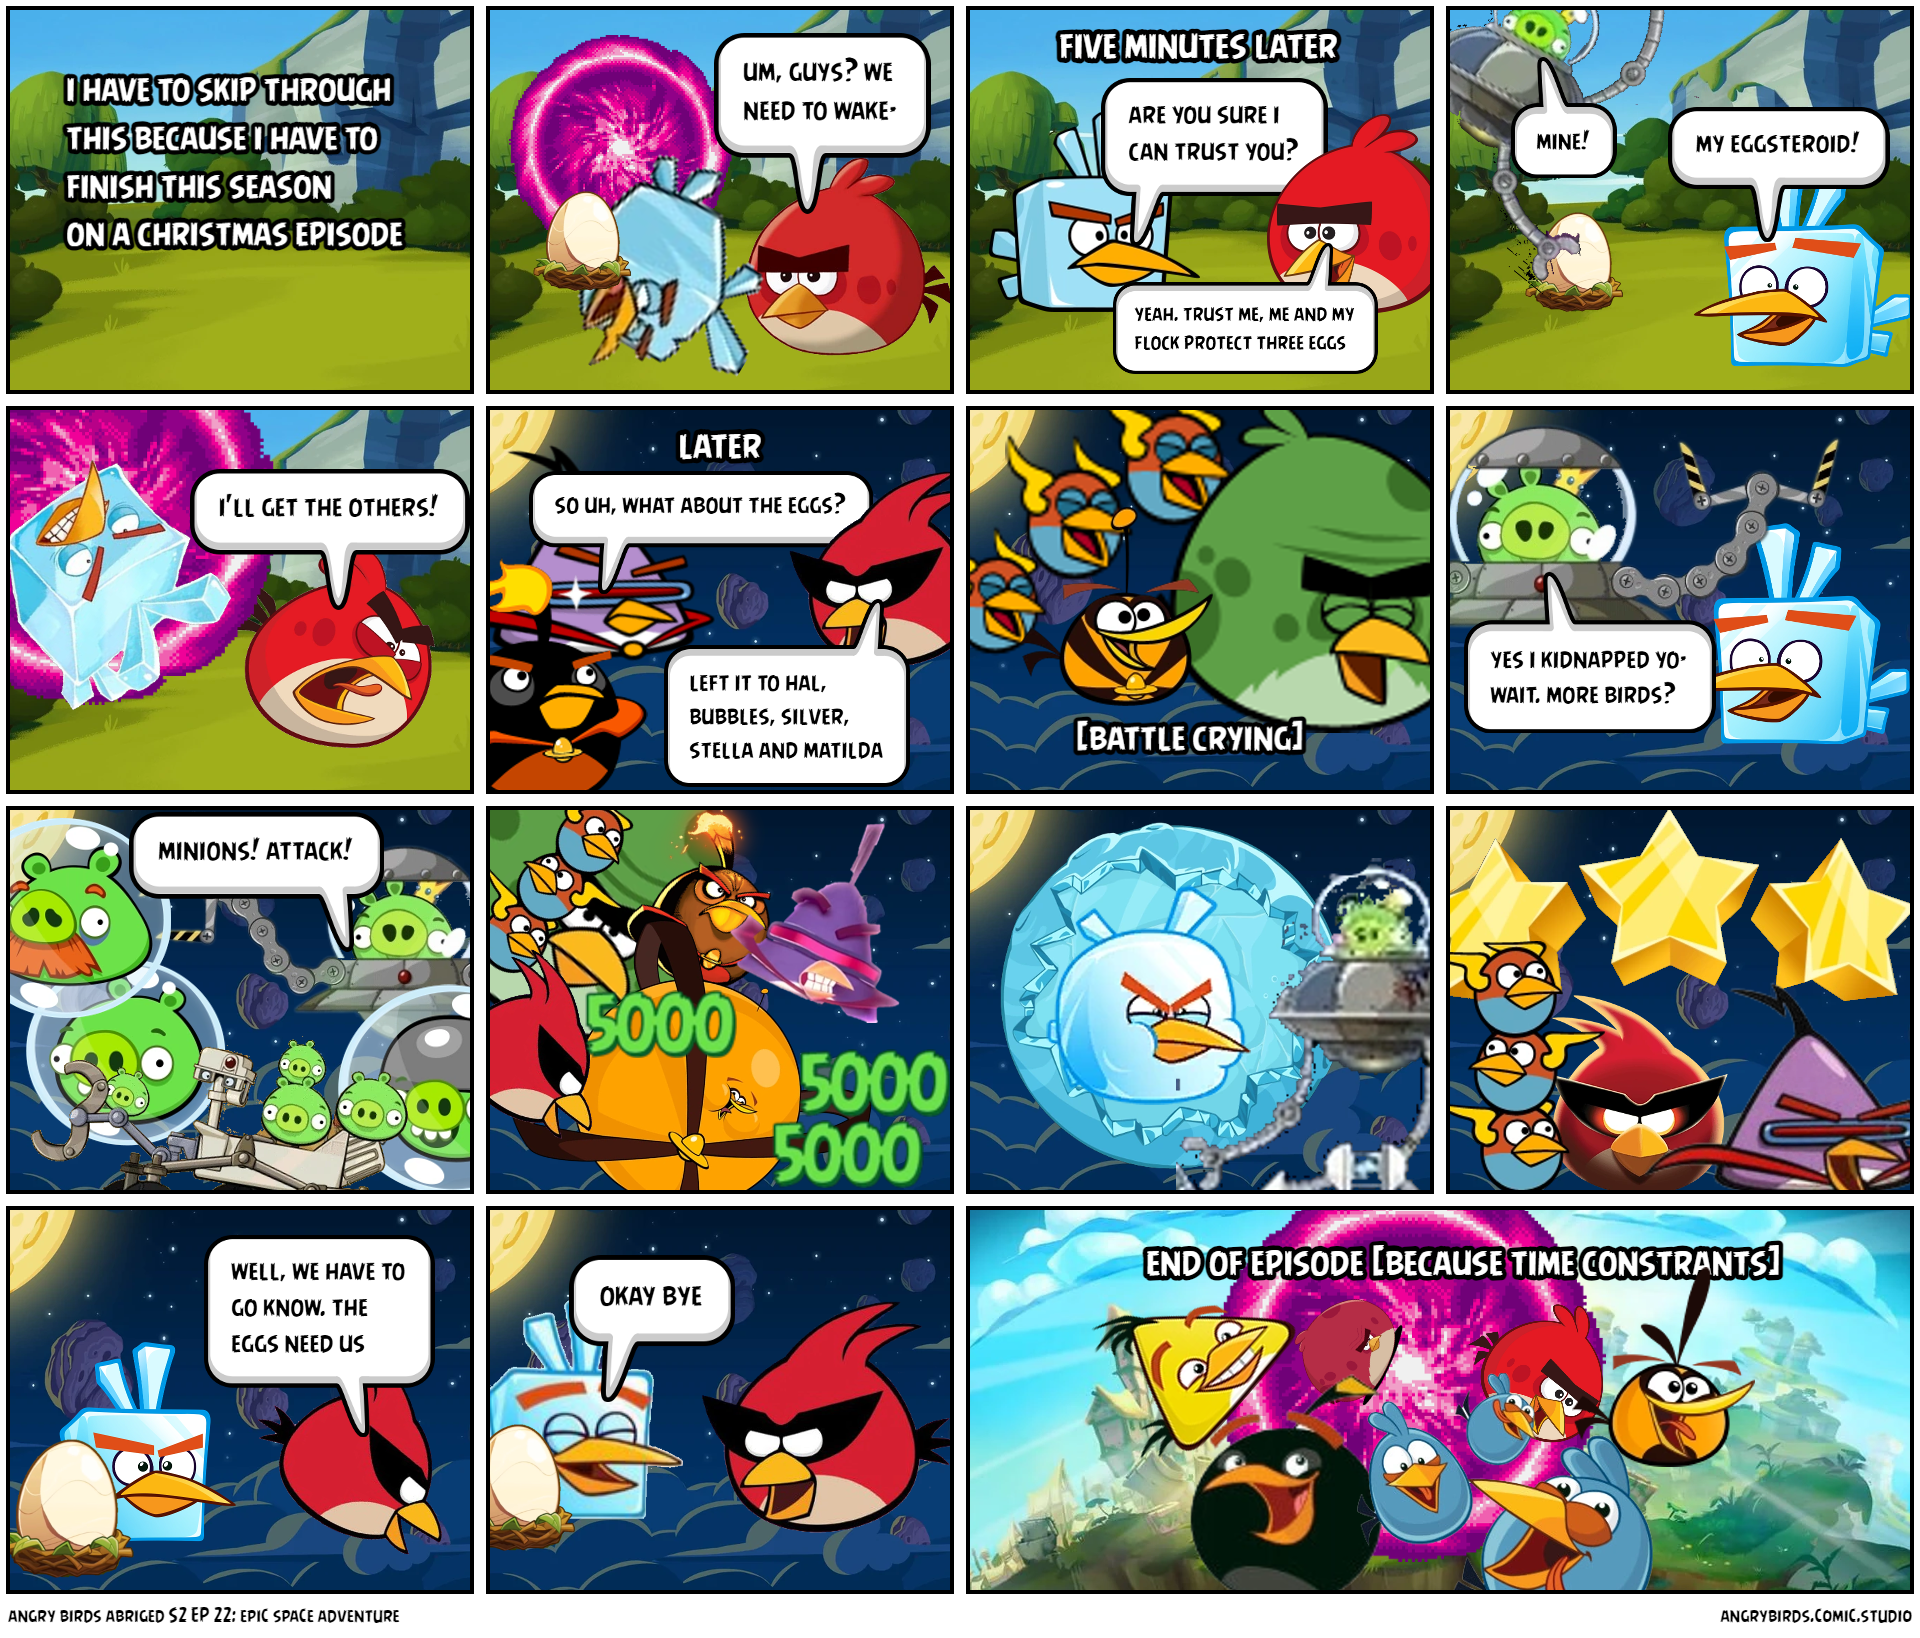 angry birds abriged S2 EP 22: epic space adventure